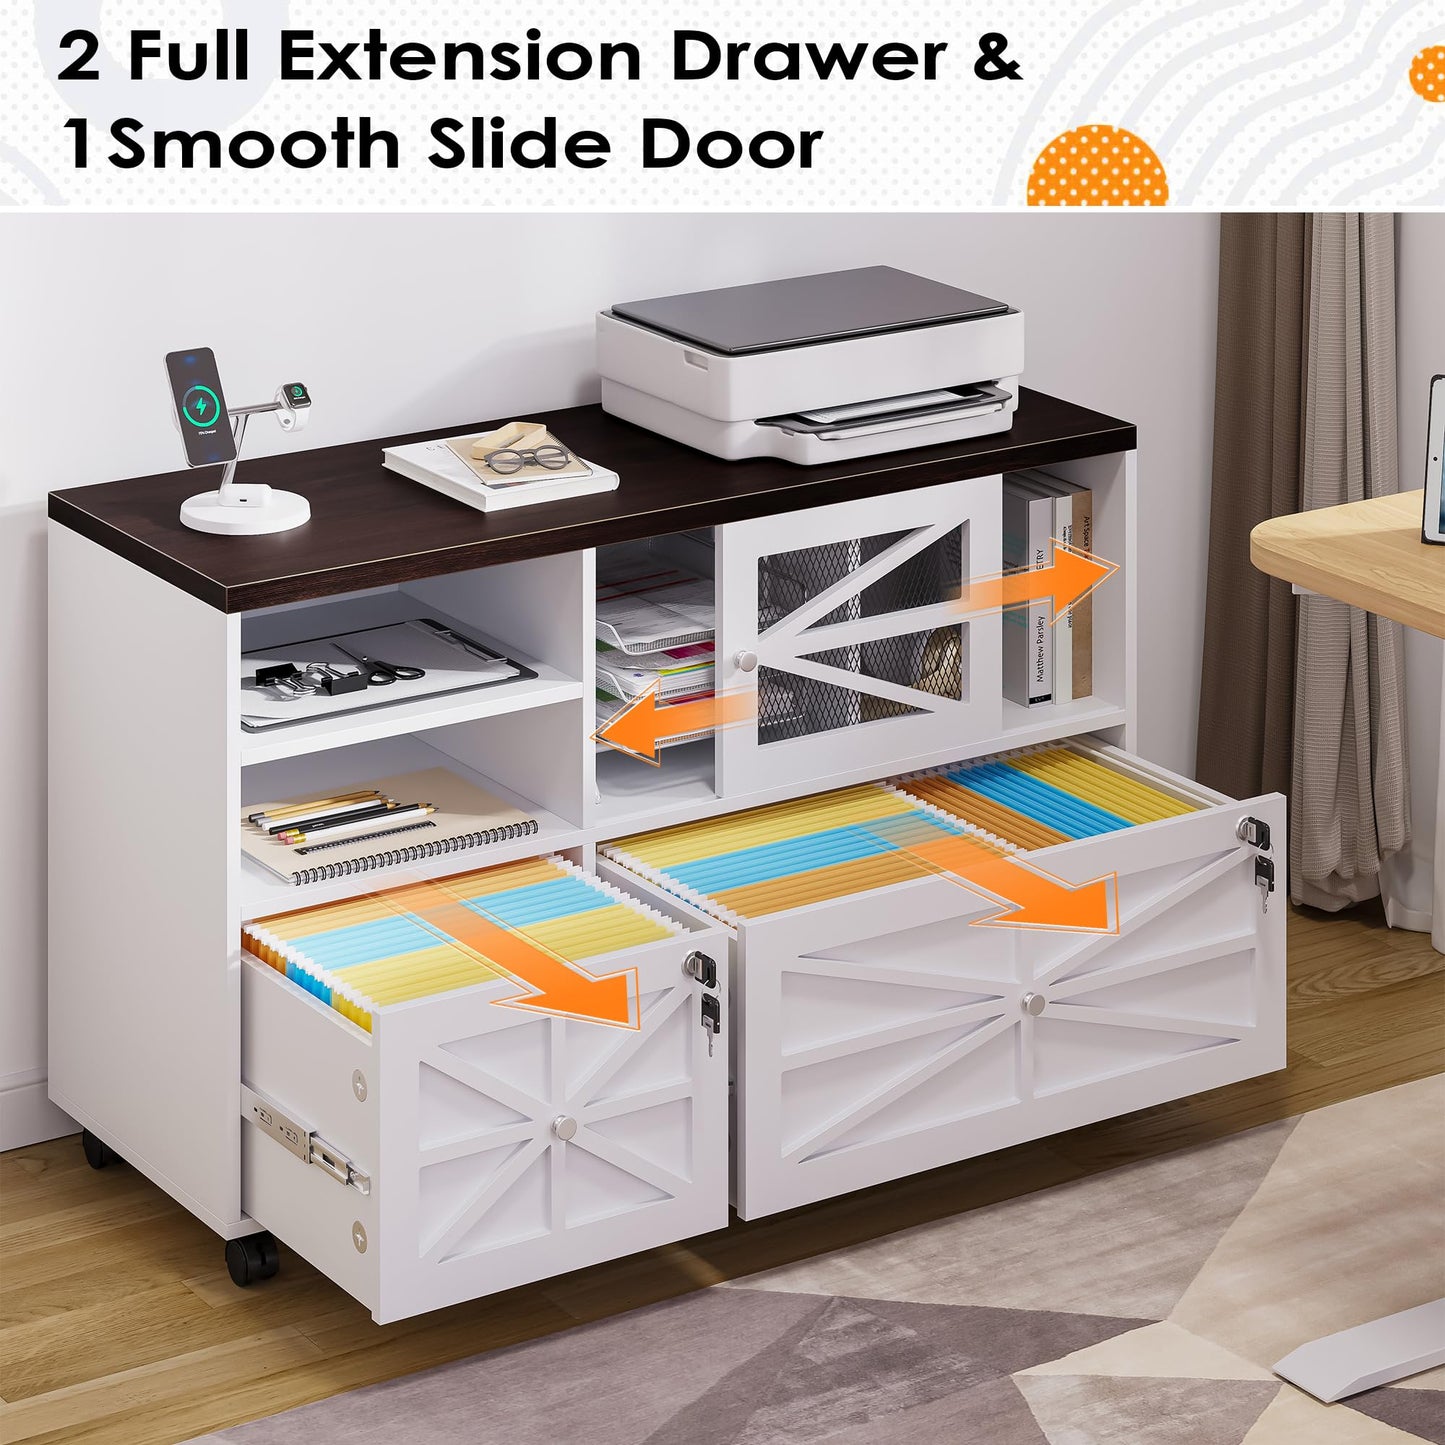 kepptory 2 Drawer File Cabinet with Lock, Rolling File Cabinet for Home Office Fits Files Letter/Legal/F4/A4, Filing Cabinet 2 Drawer with Adjustable Shelf & 2 Lockable Wheels (White + Brown)